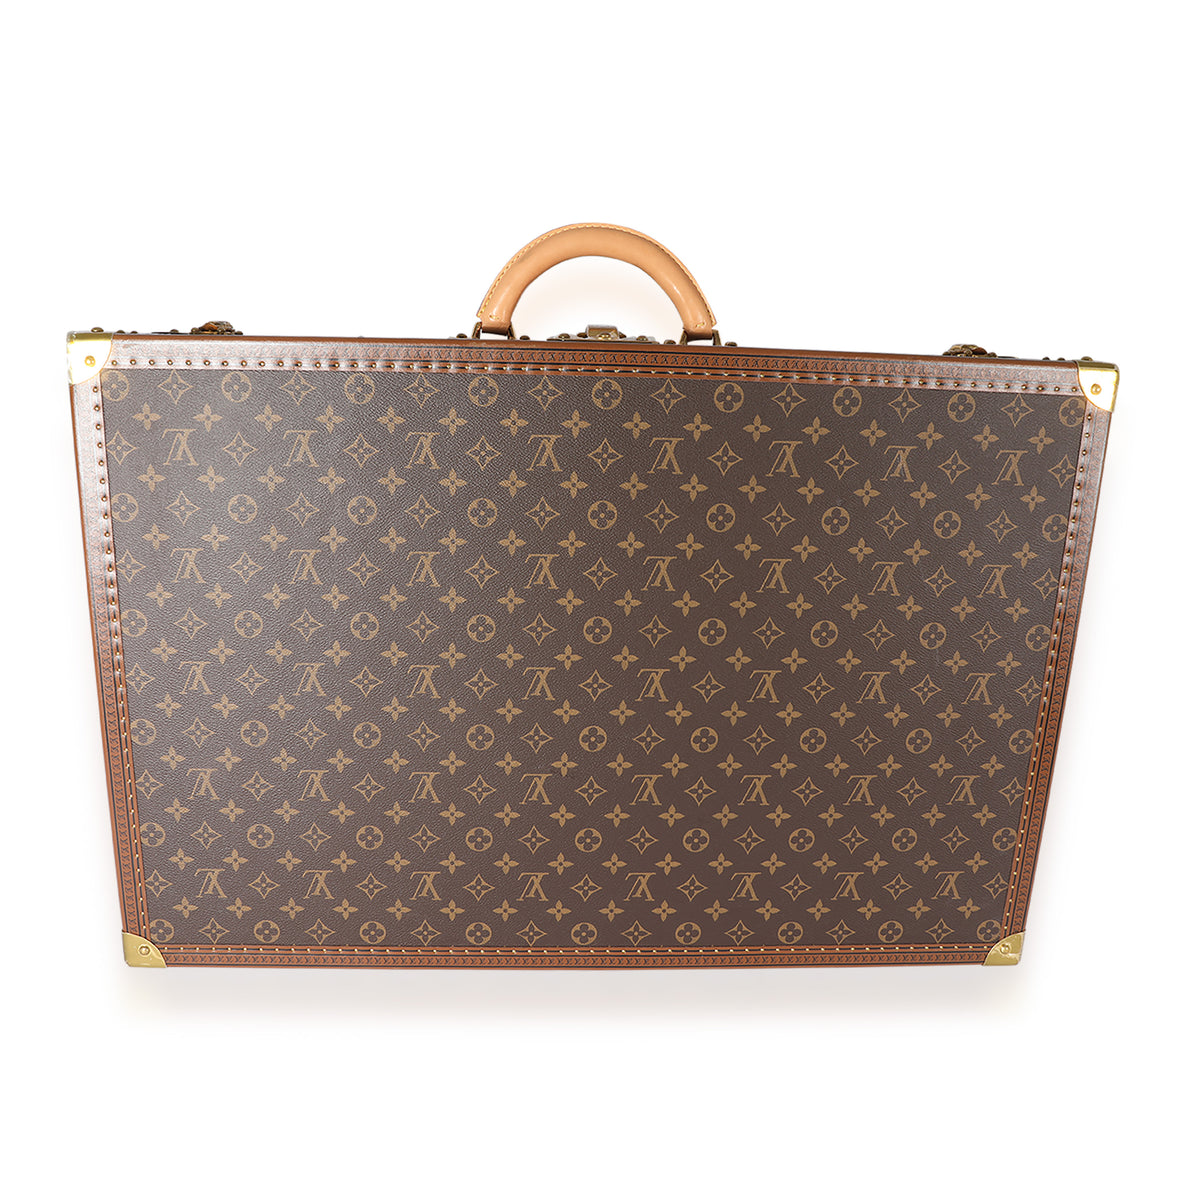 How to tell the difference between a Louis Vuitton bisten and a